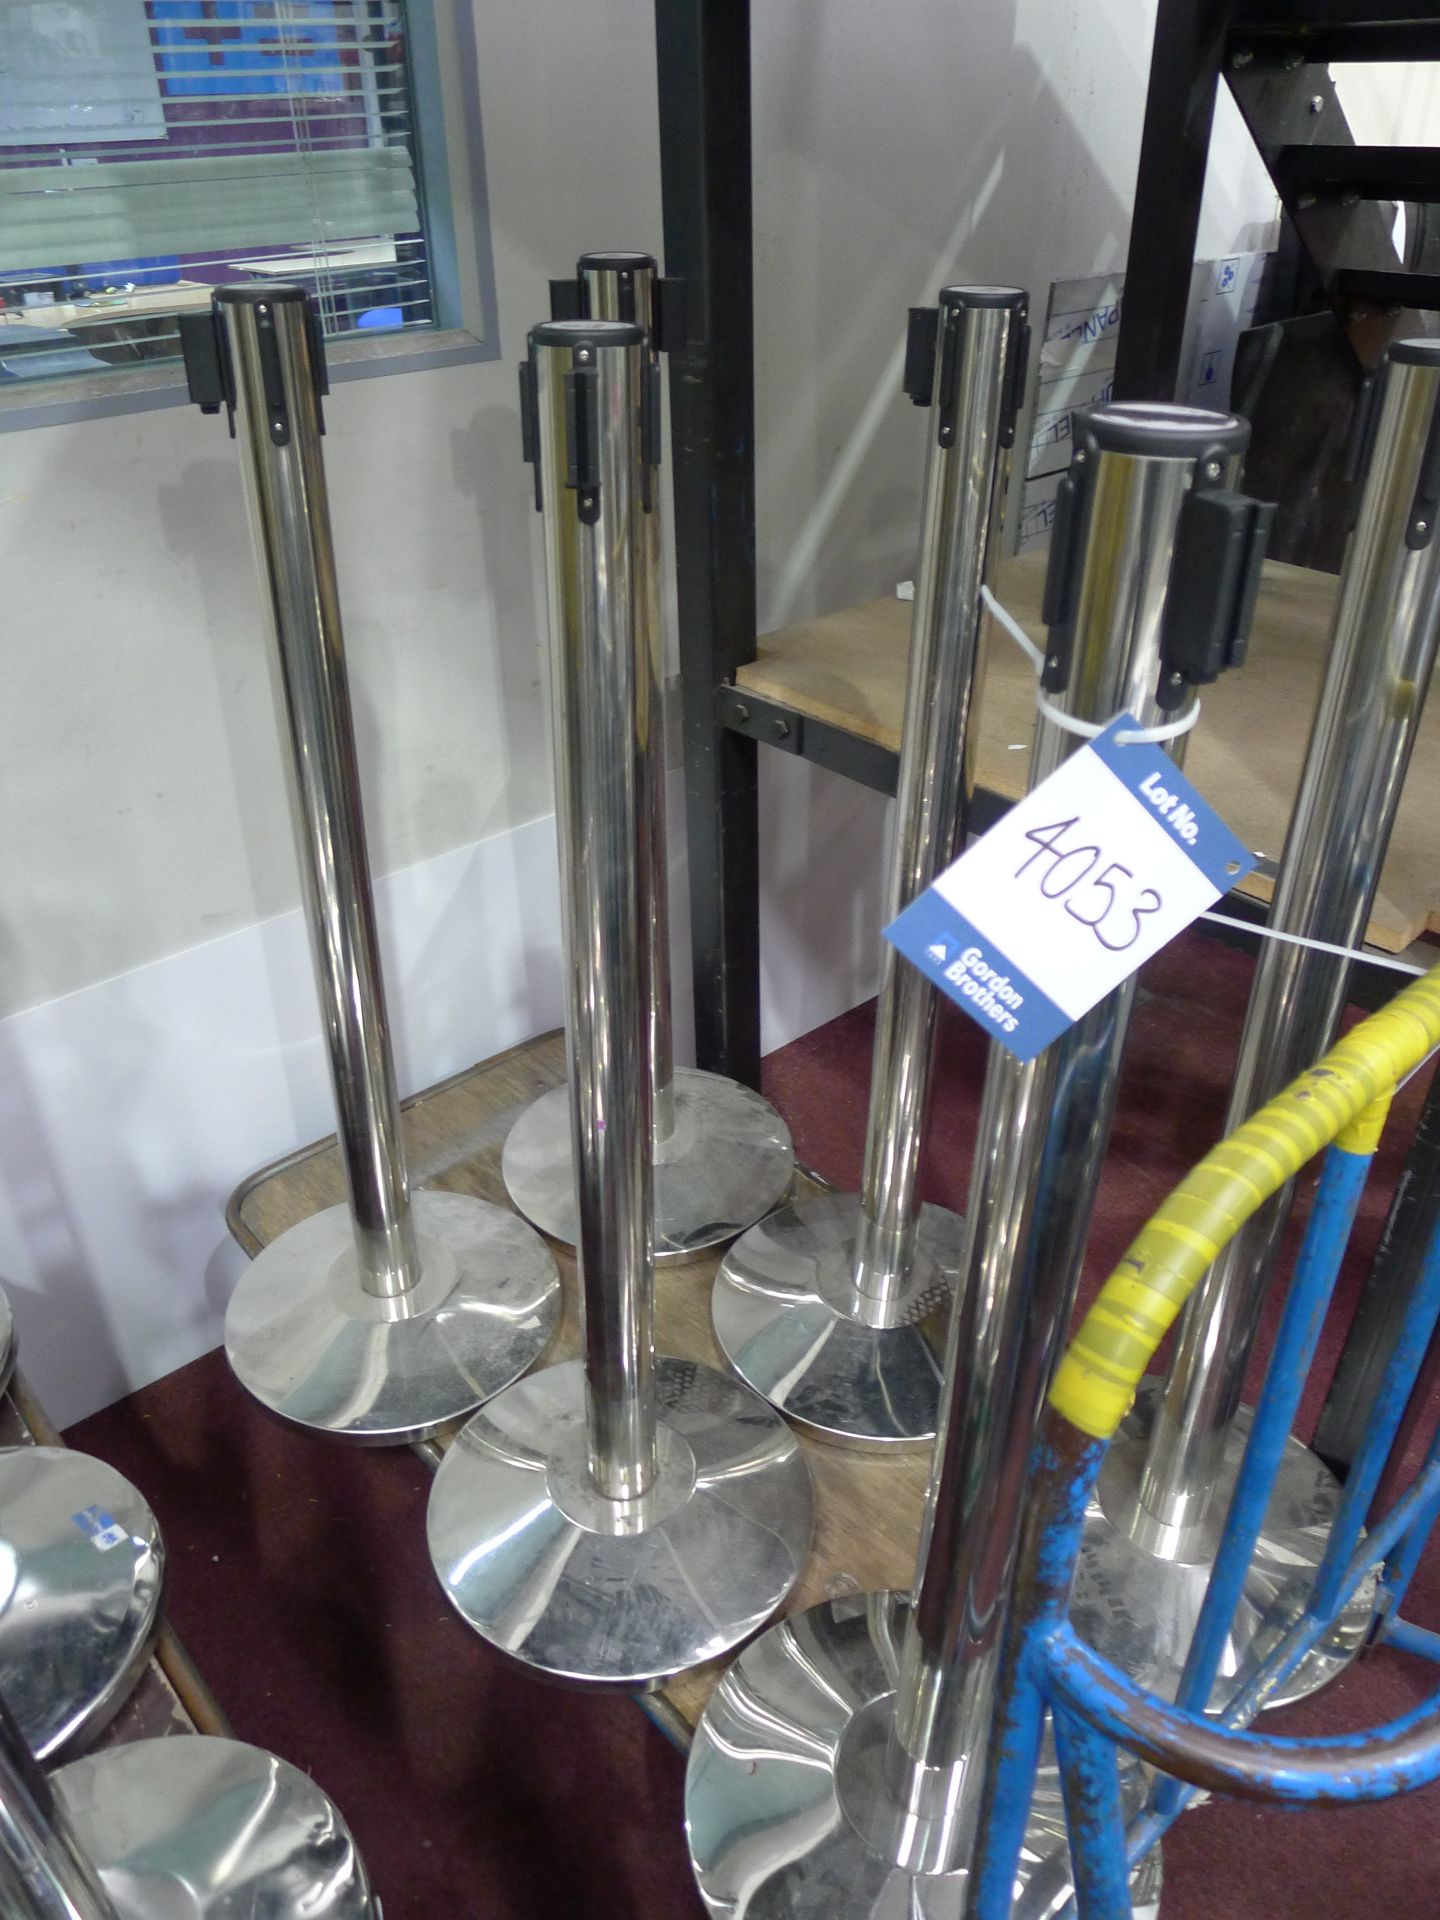 6 Chrome Barrier Posts: Unit 500, Eckersall Road,